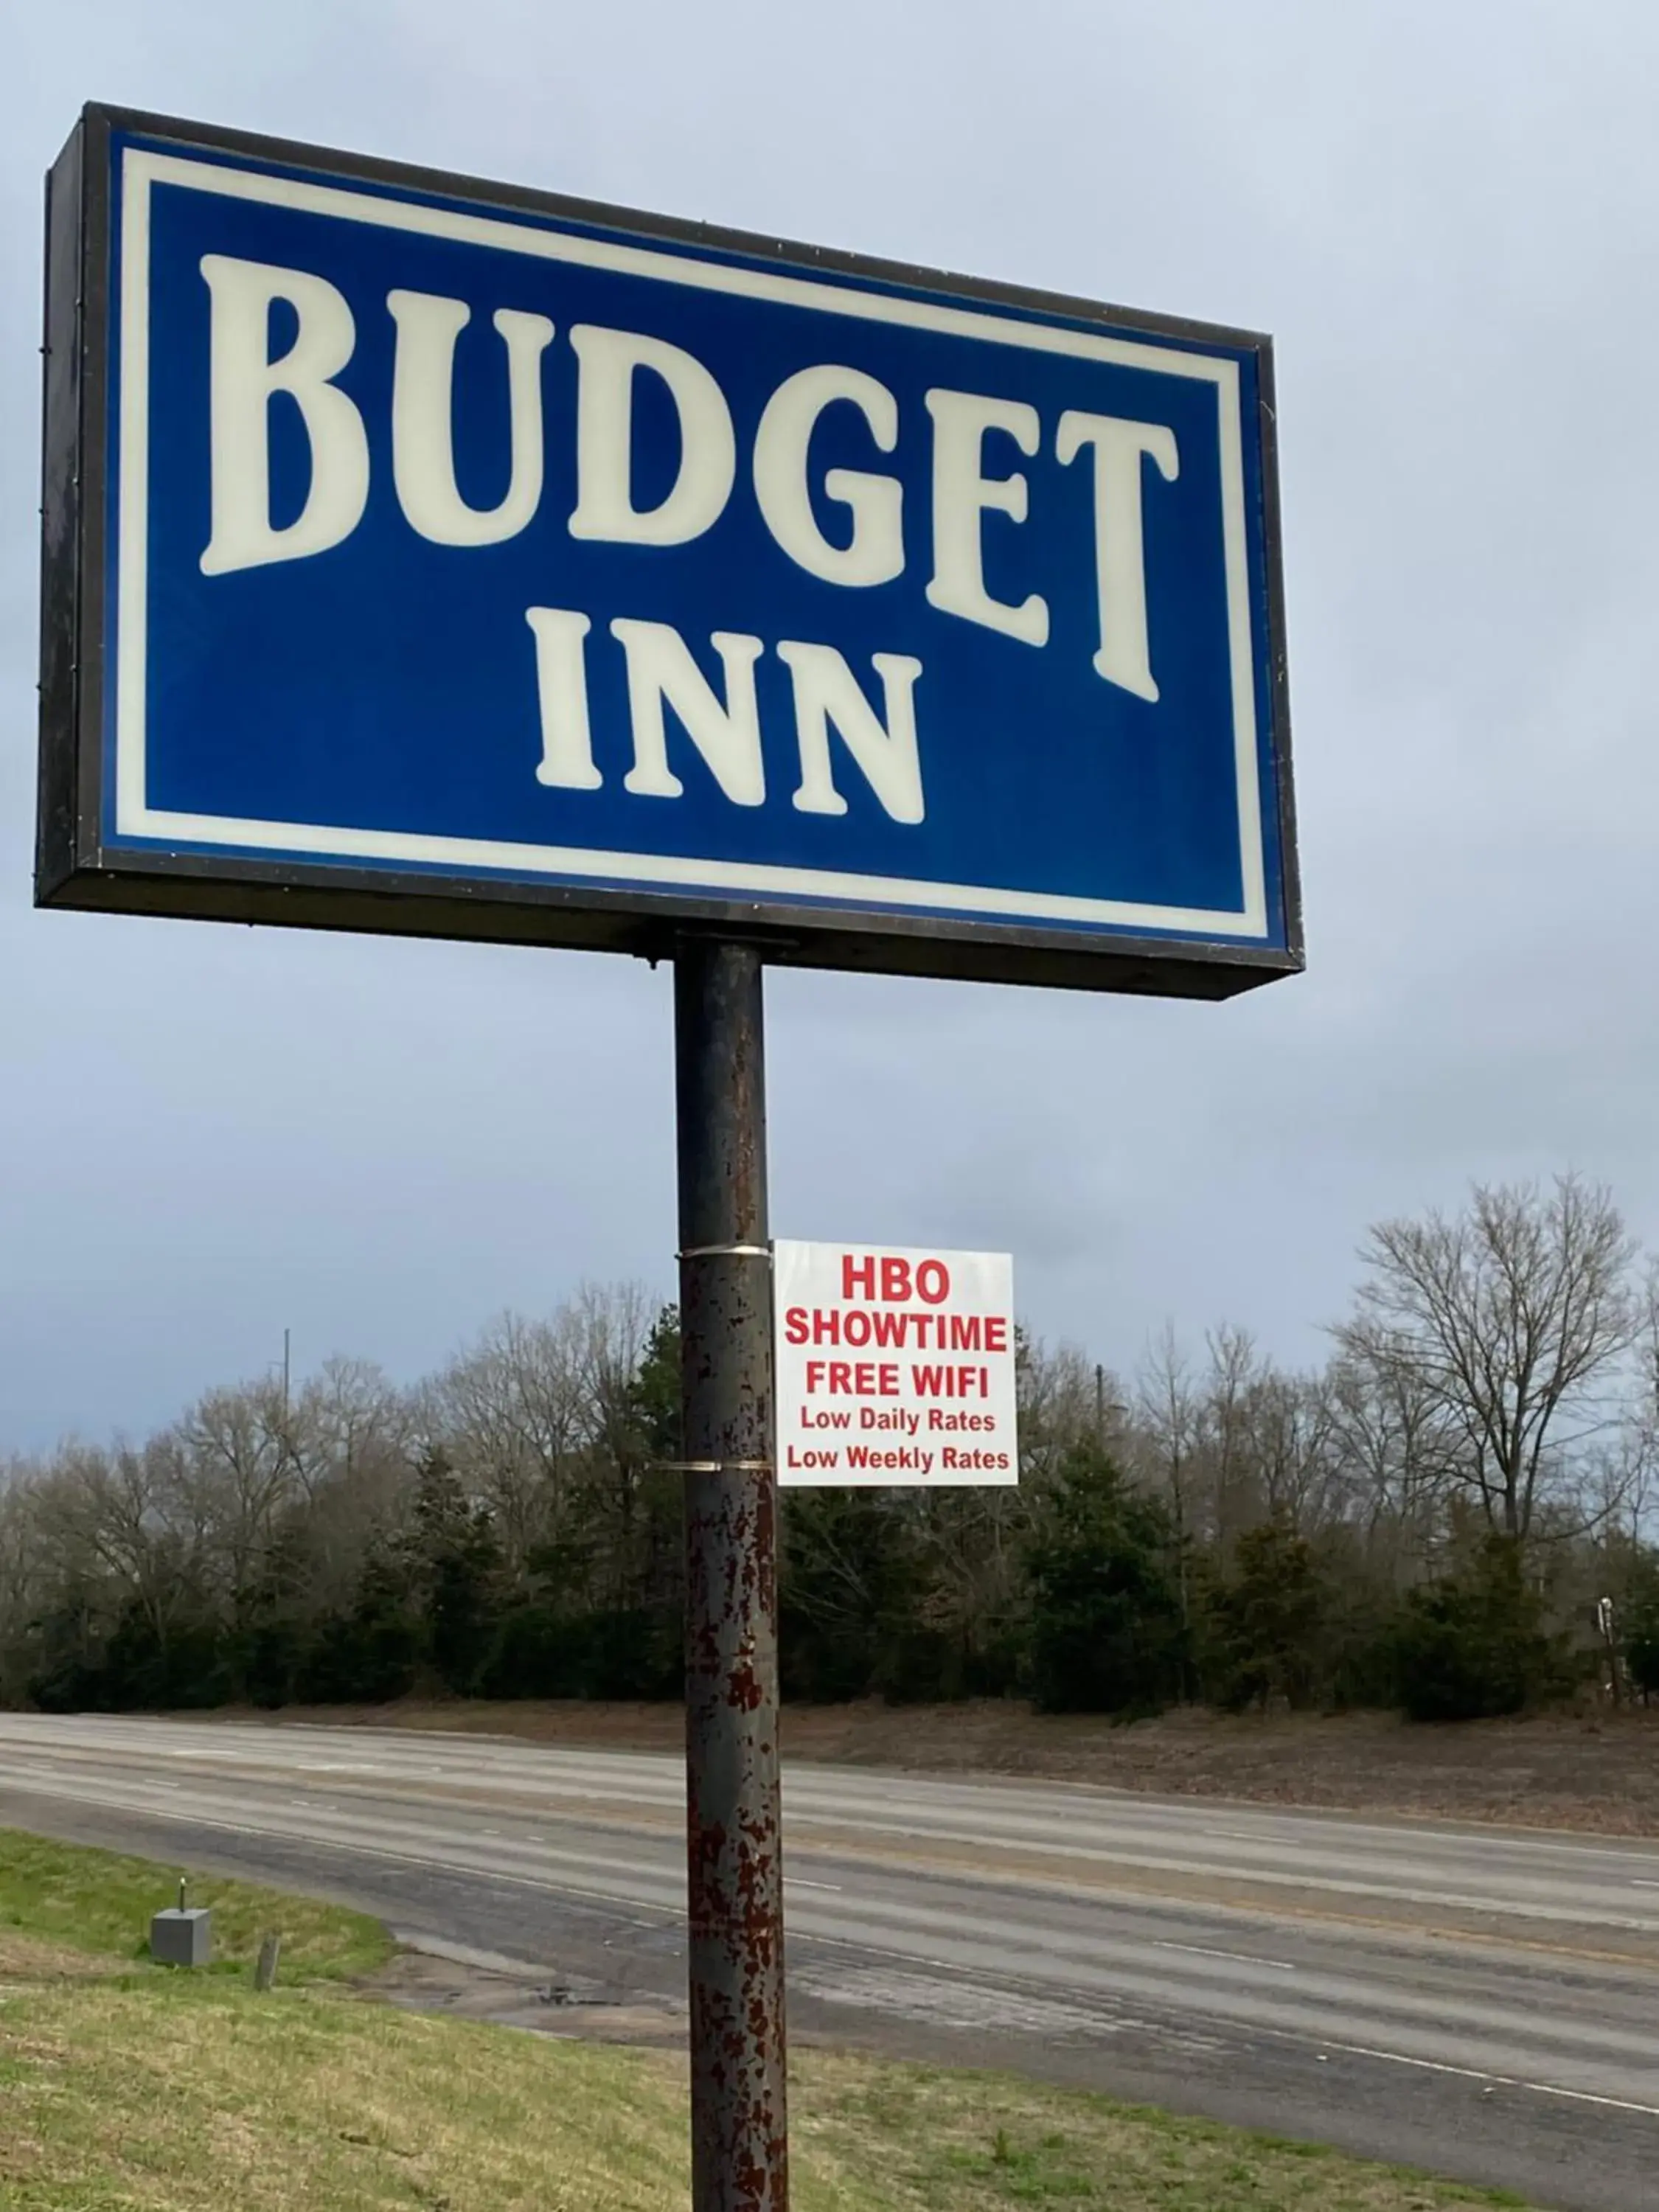 Property logo or sign in Budget Inn